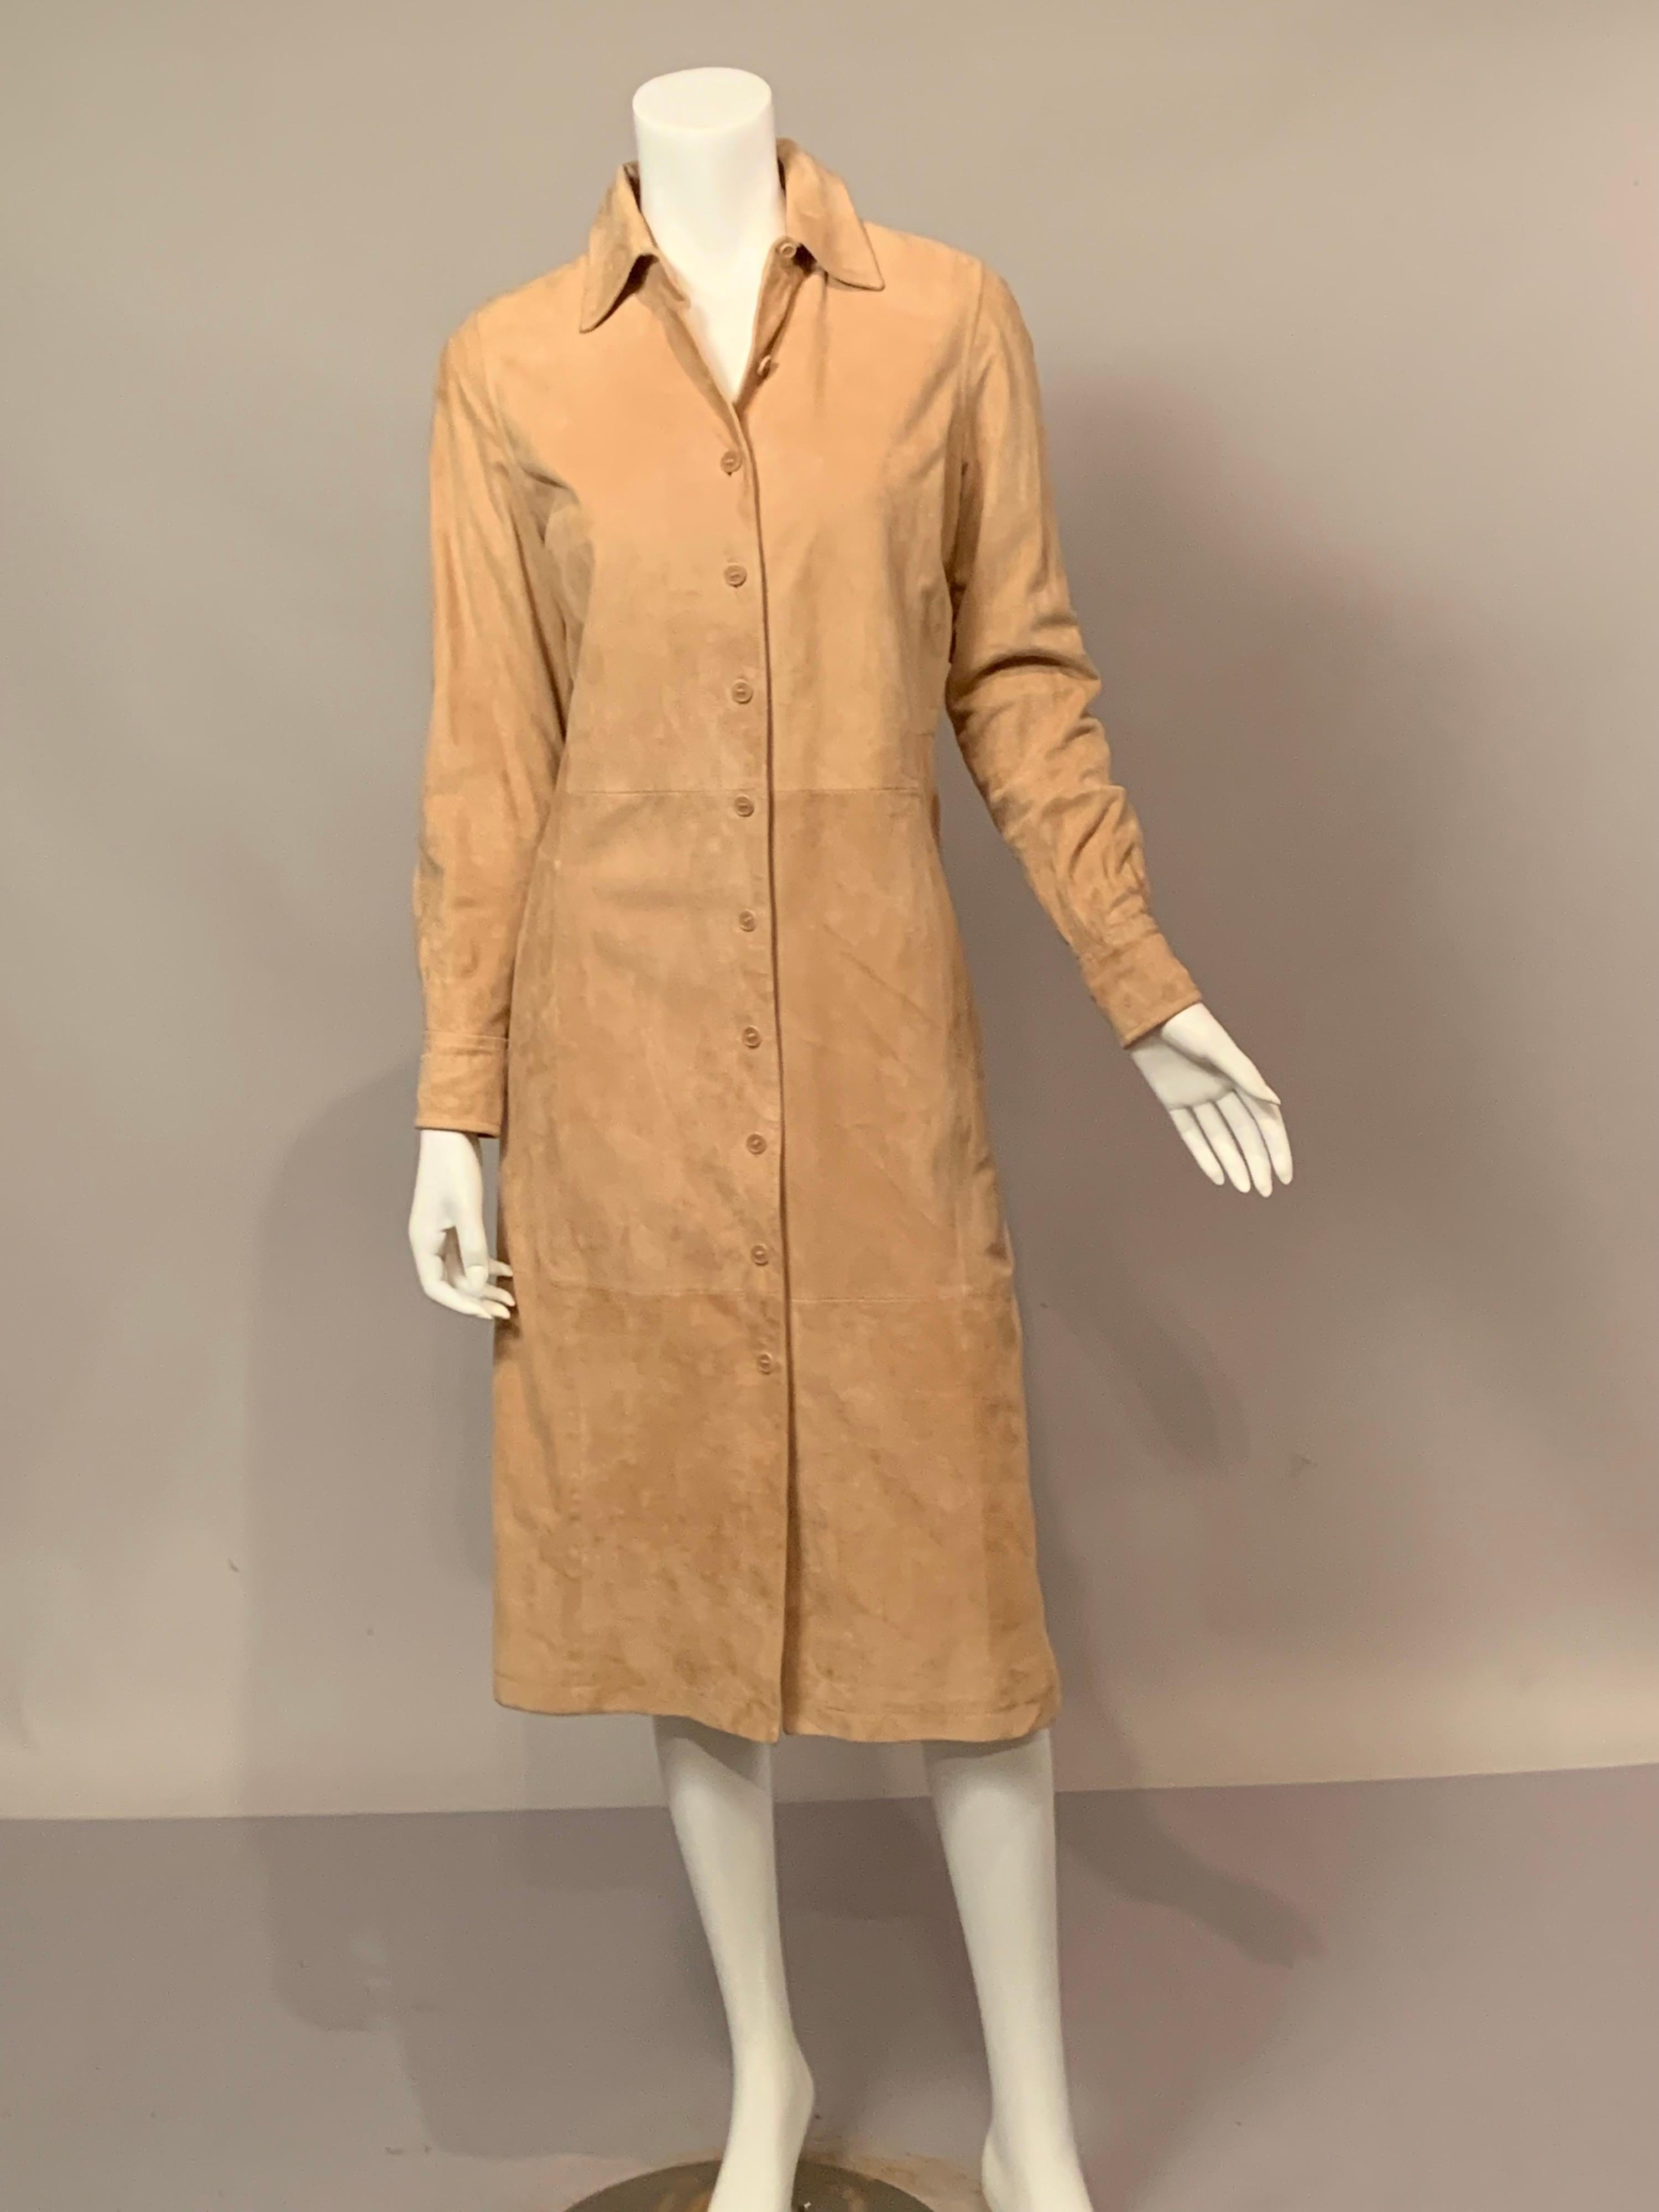 This Facconable, Paris light tan button front suede dress or coat dress can be dressed up or down for so many occasions.  It has a button front, with a small label near the hem, side openings in the skirt, and button cuffs which also look good